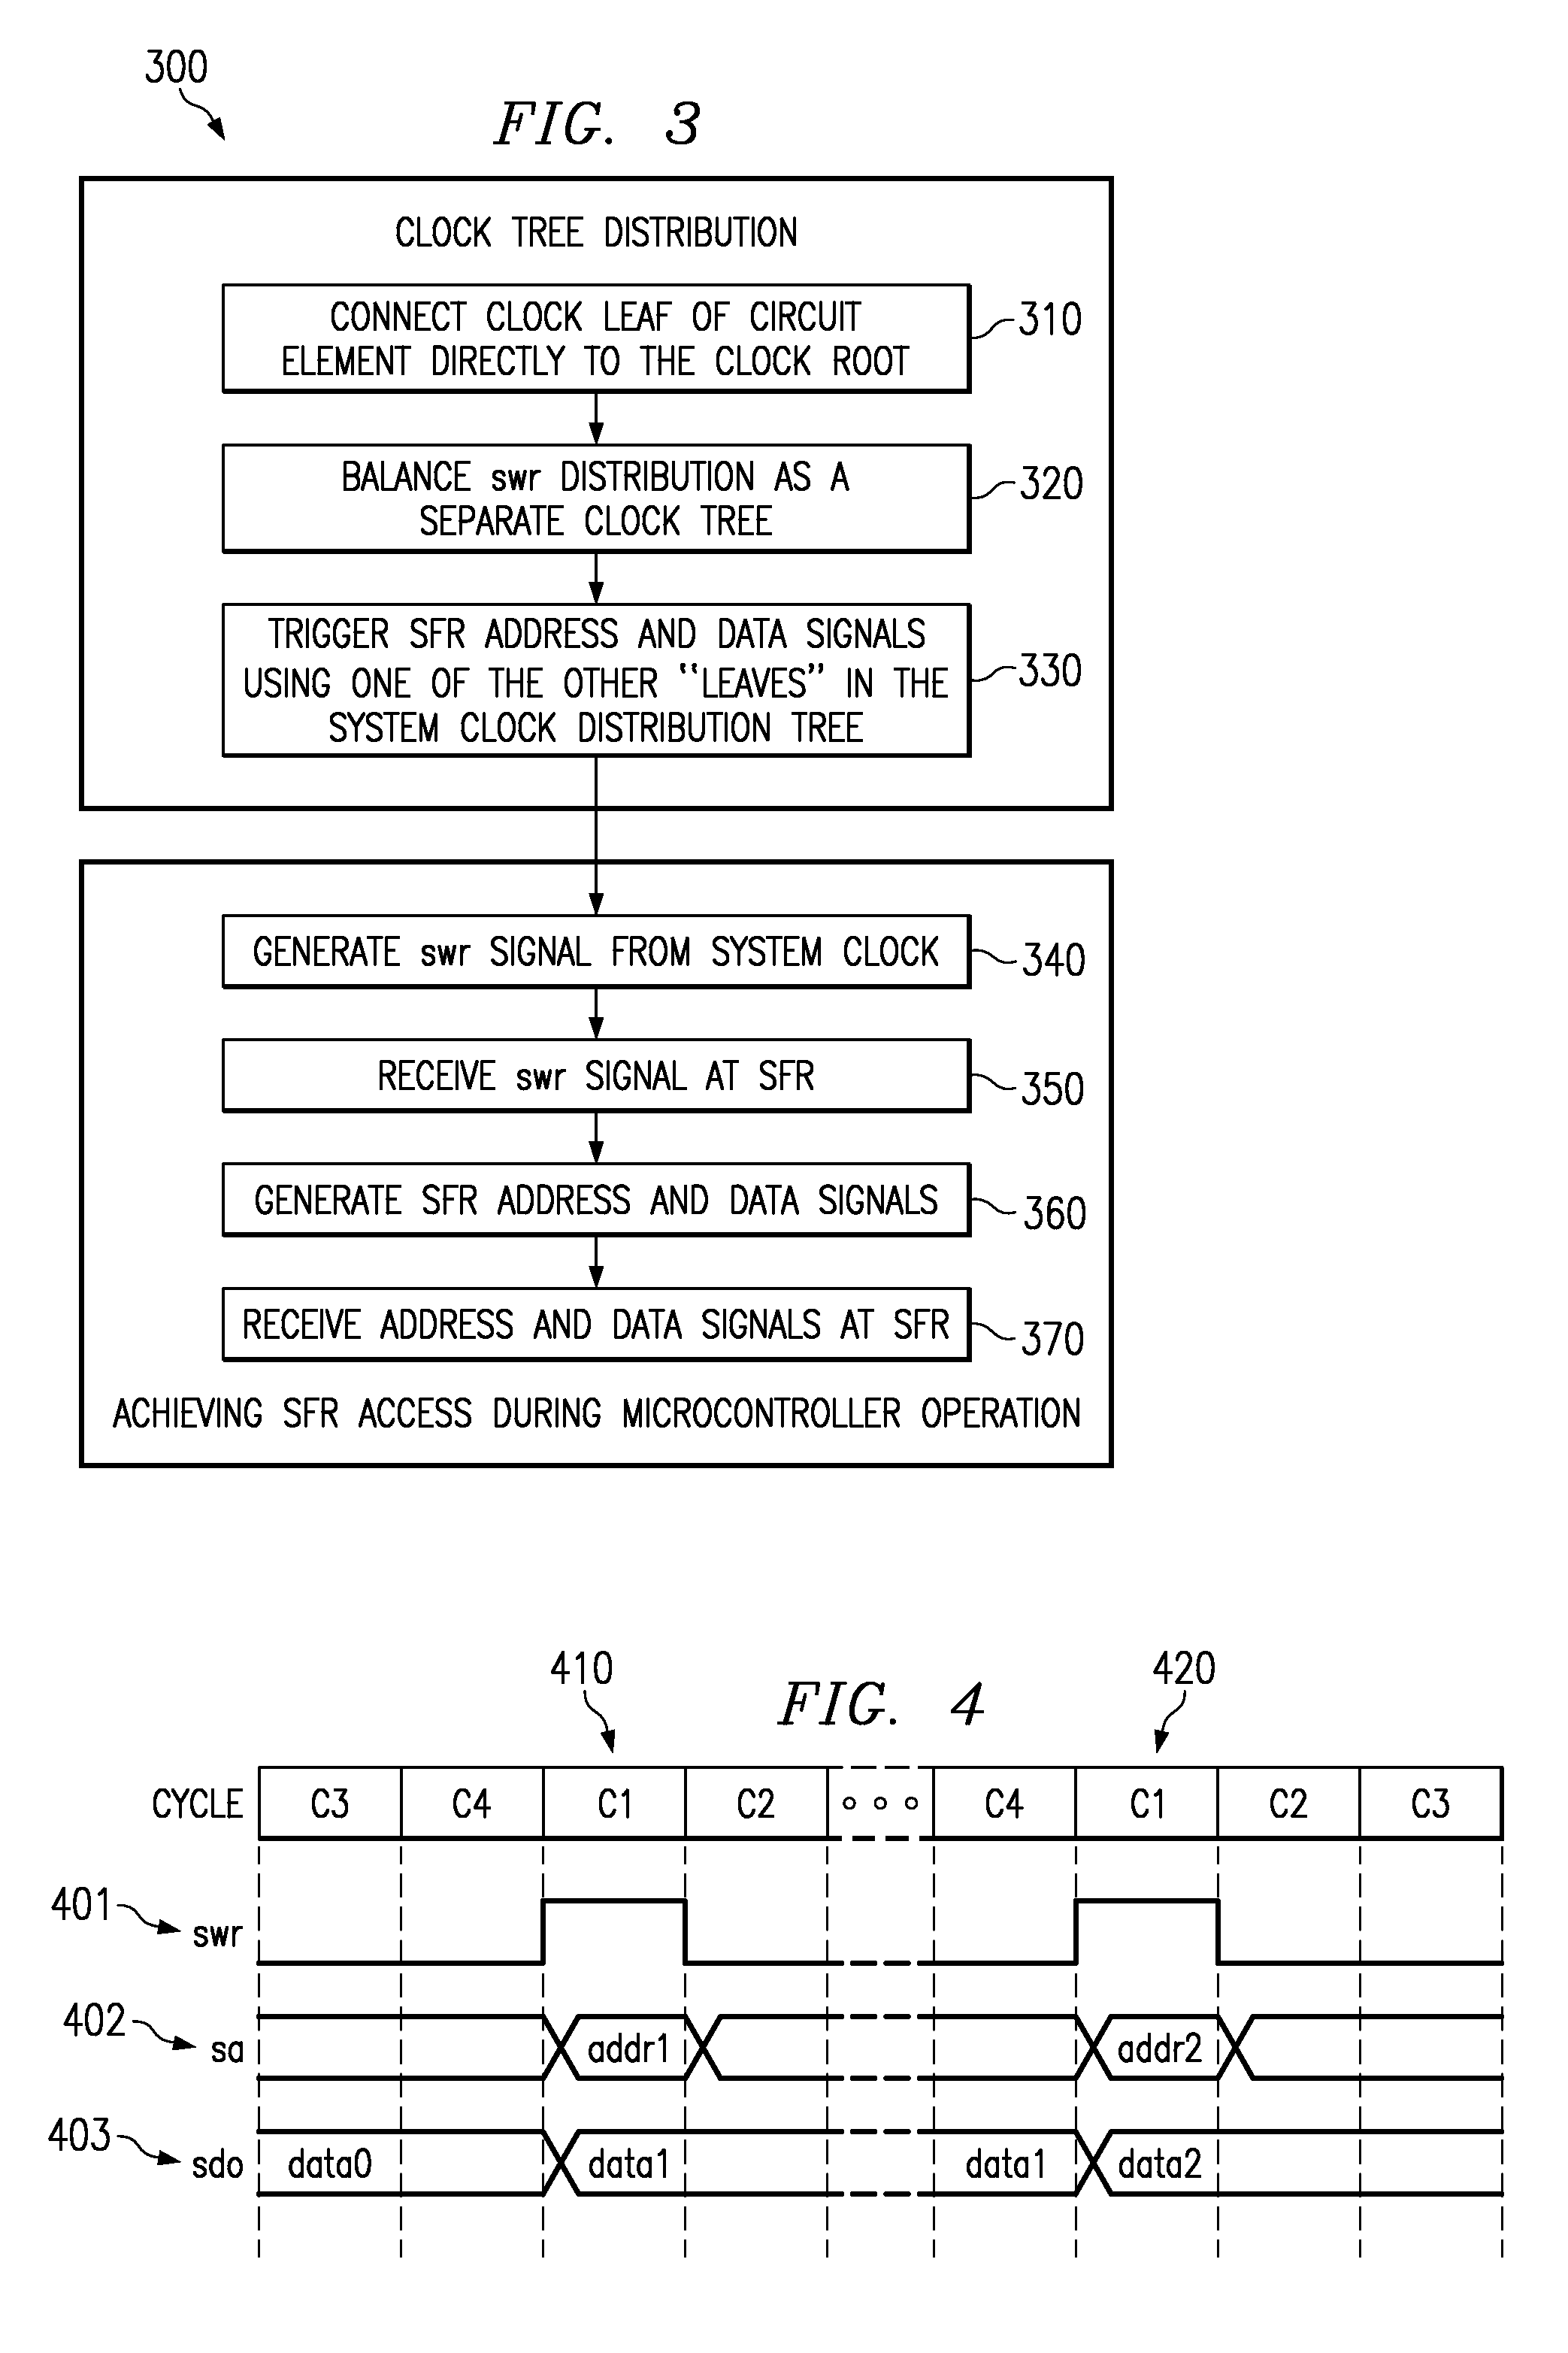 System and method for providing a write strobe signal to a receiving element before both an address and data signal